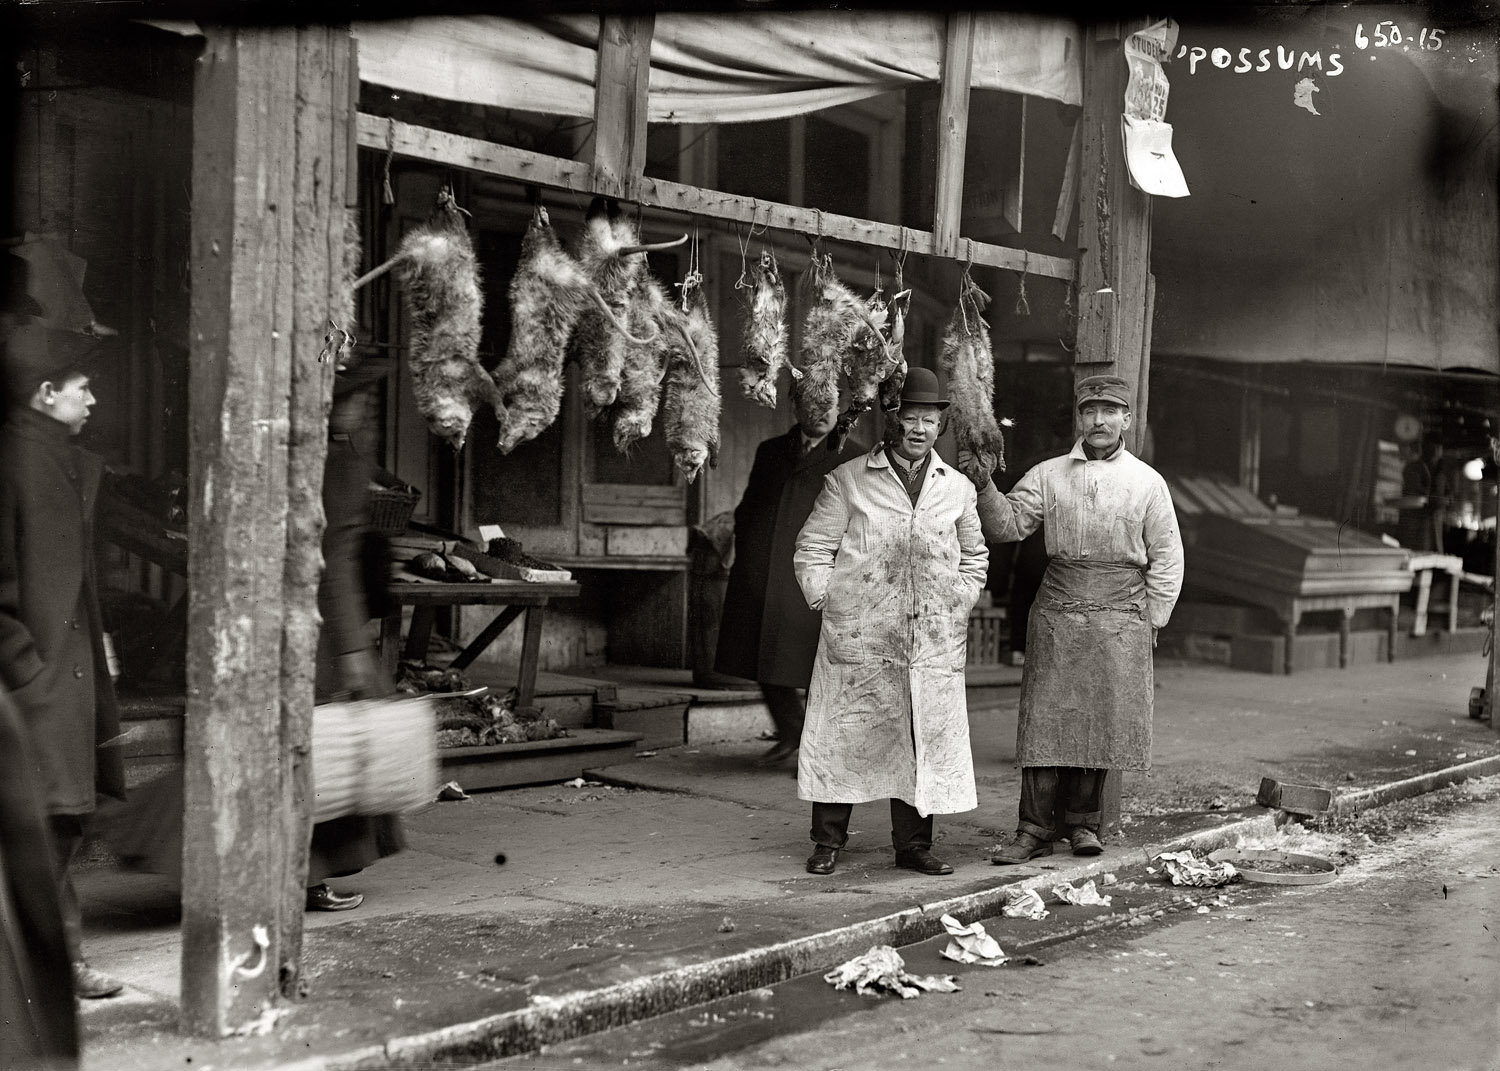 New York circa 1916. "Opossums hanging up outside shop." 5x7 glass negative, George Grantham Bain Collection, Library of Congress. View full size.